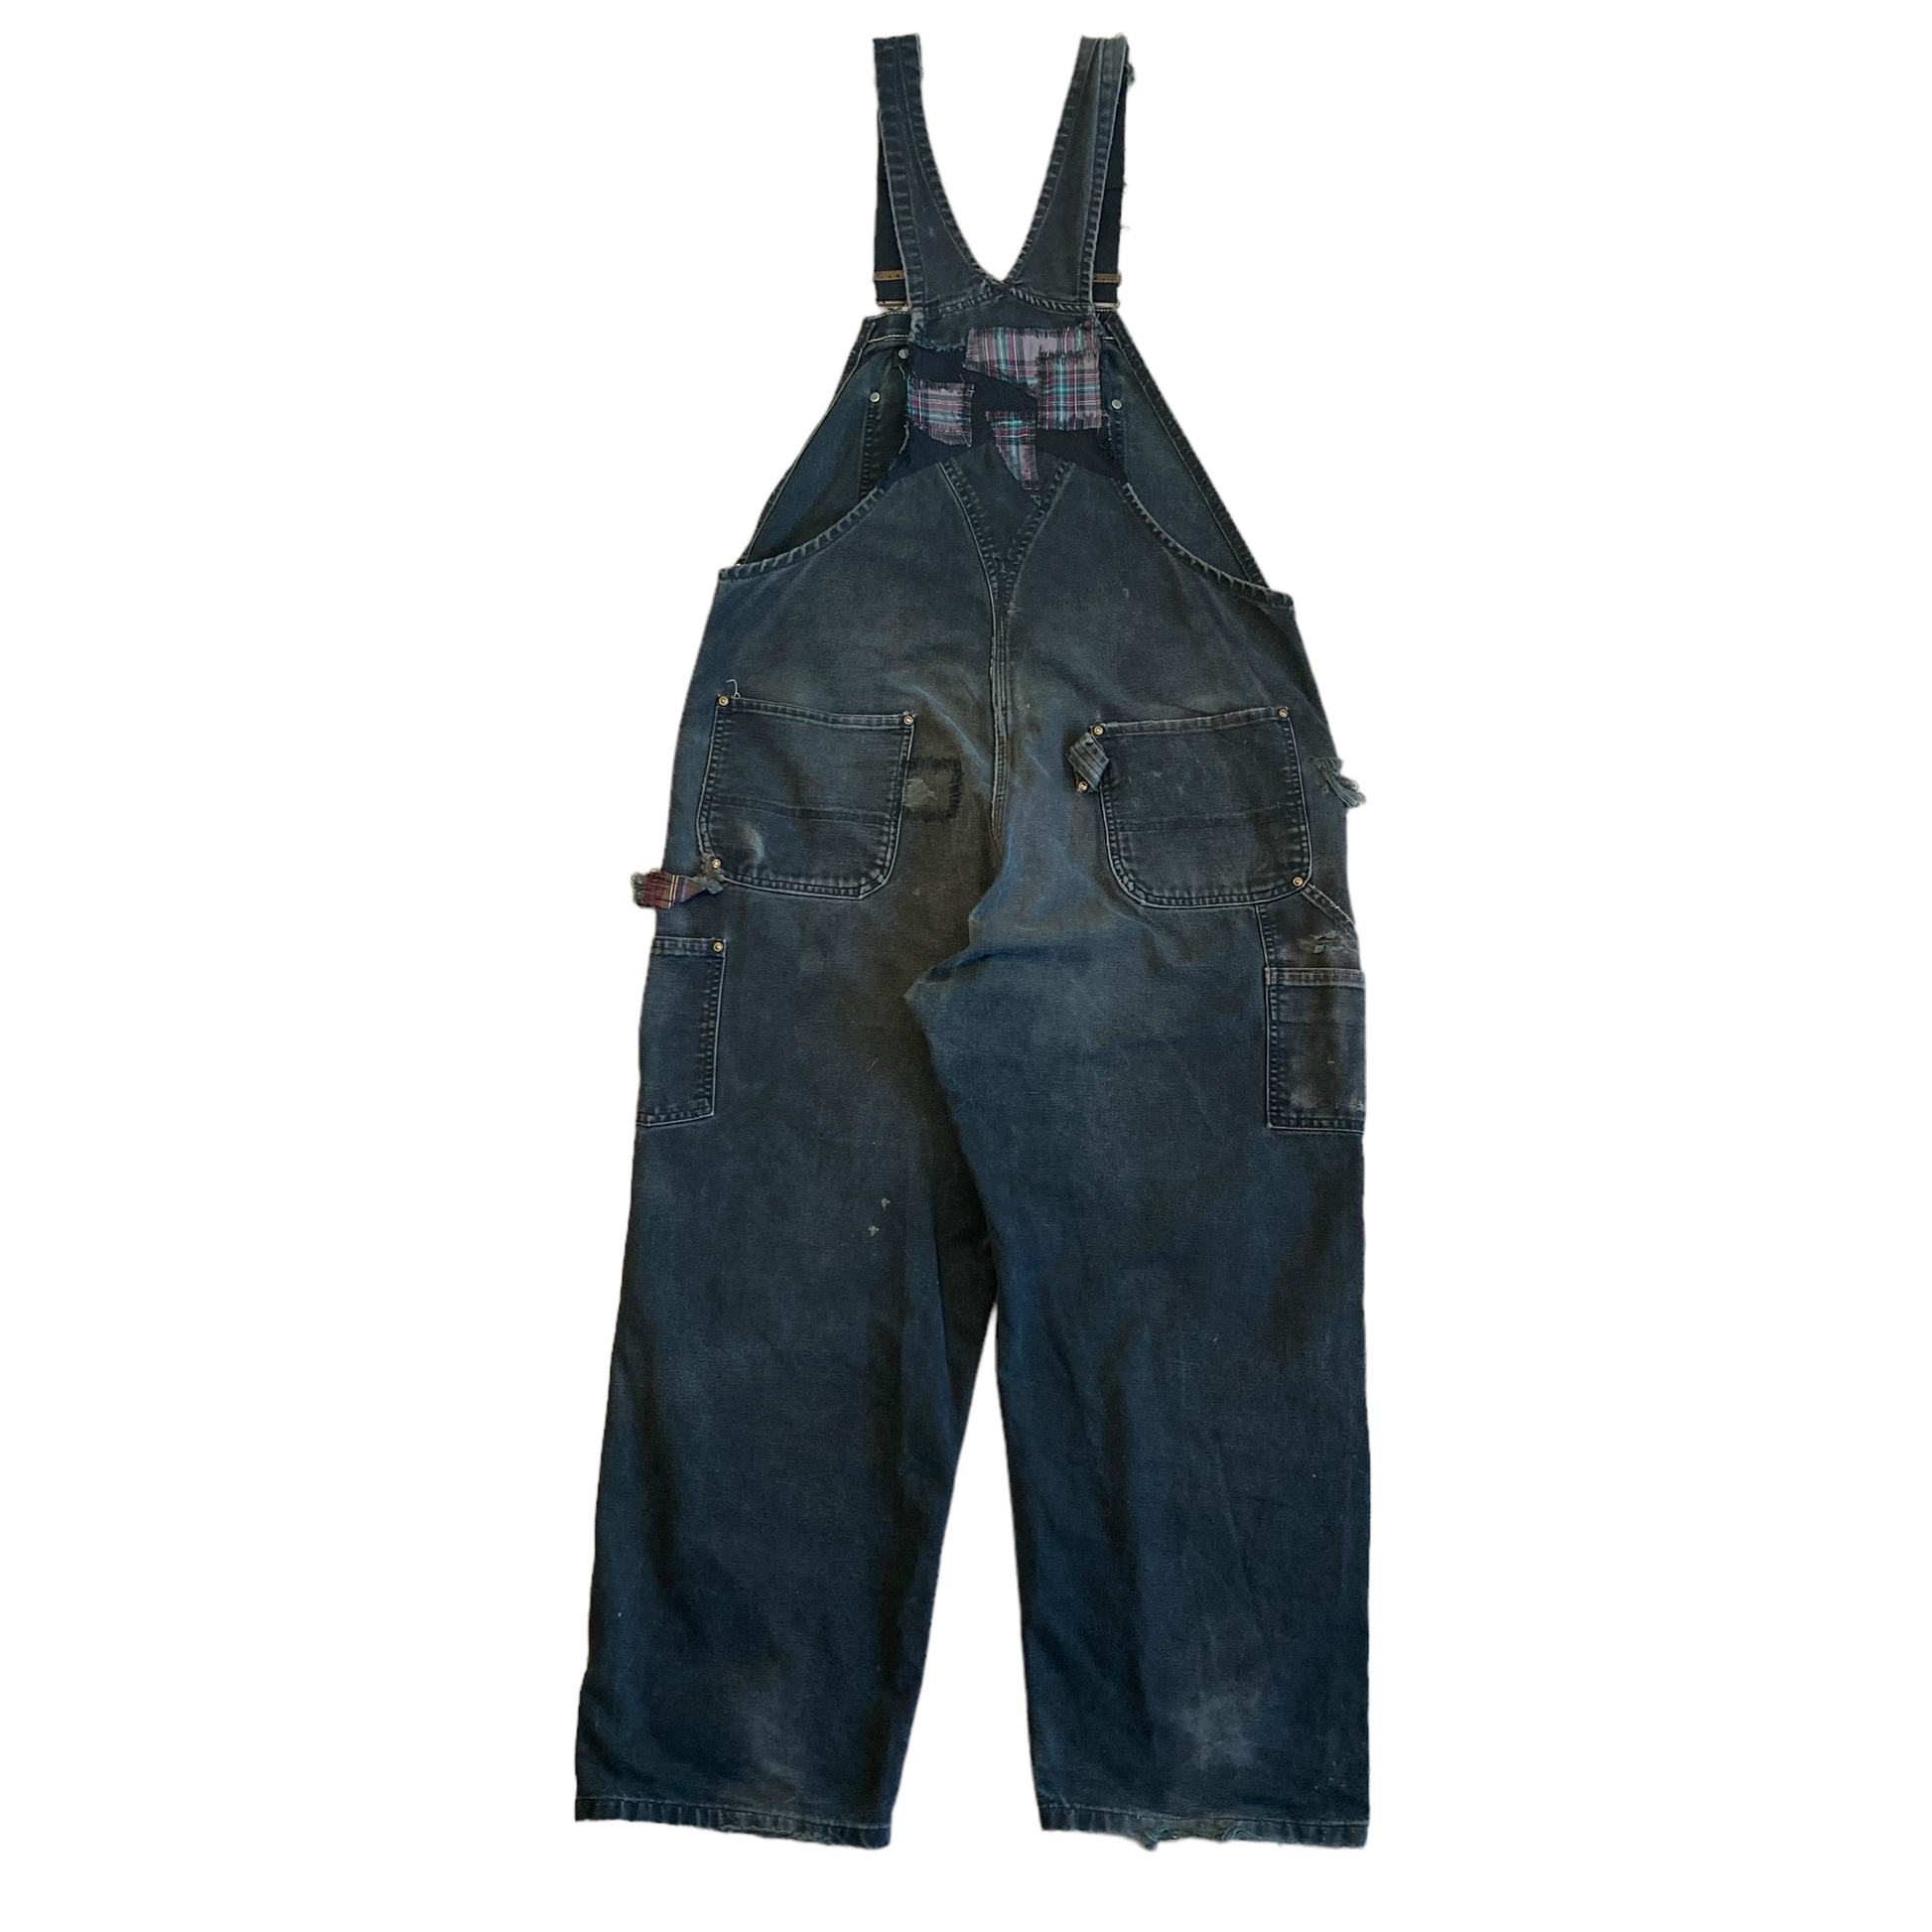 Carhartt Black Overall Plaid Repair and Strap Replacement [ 066 ] –  br0ken.1n